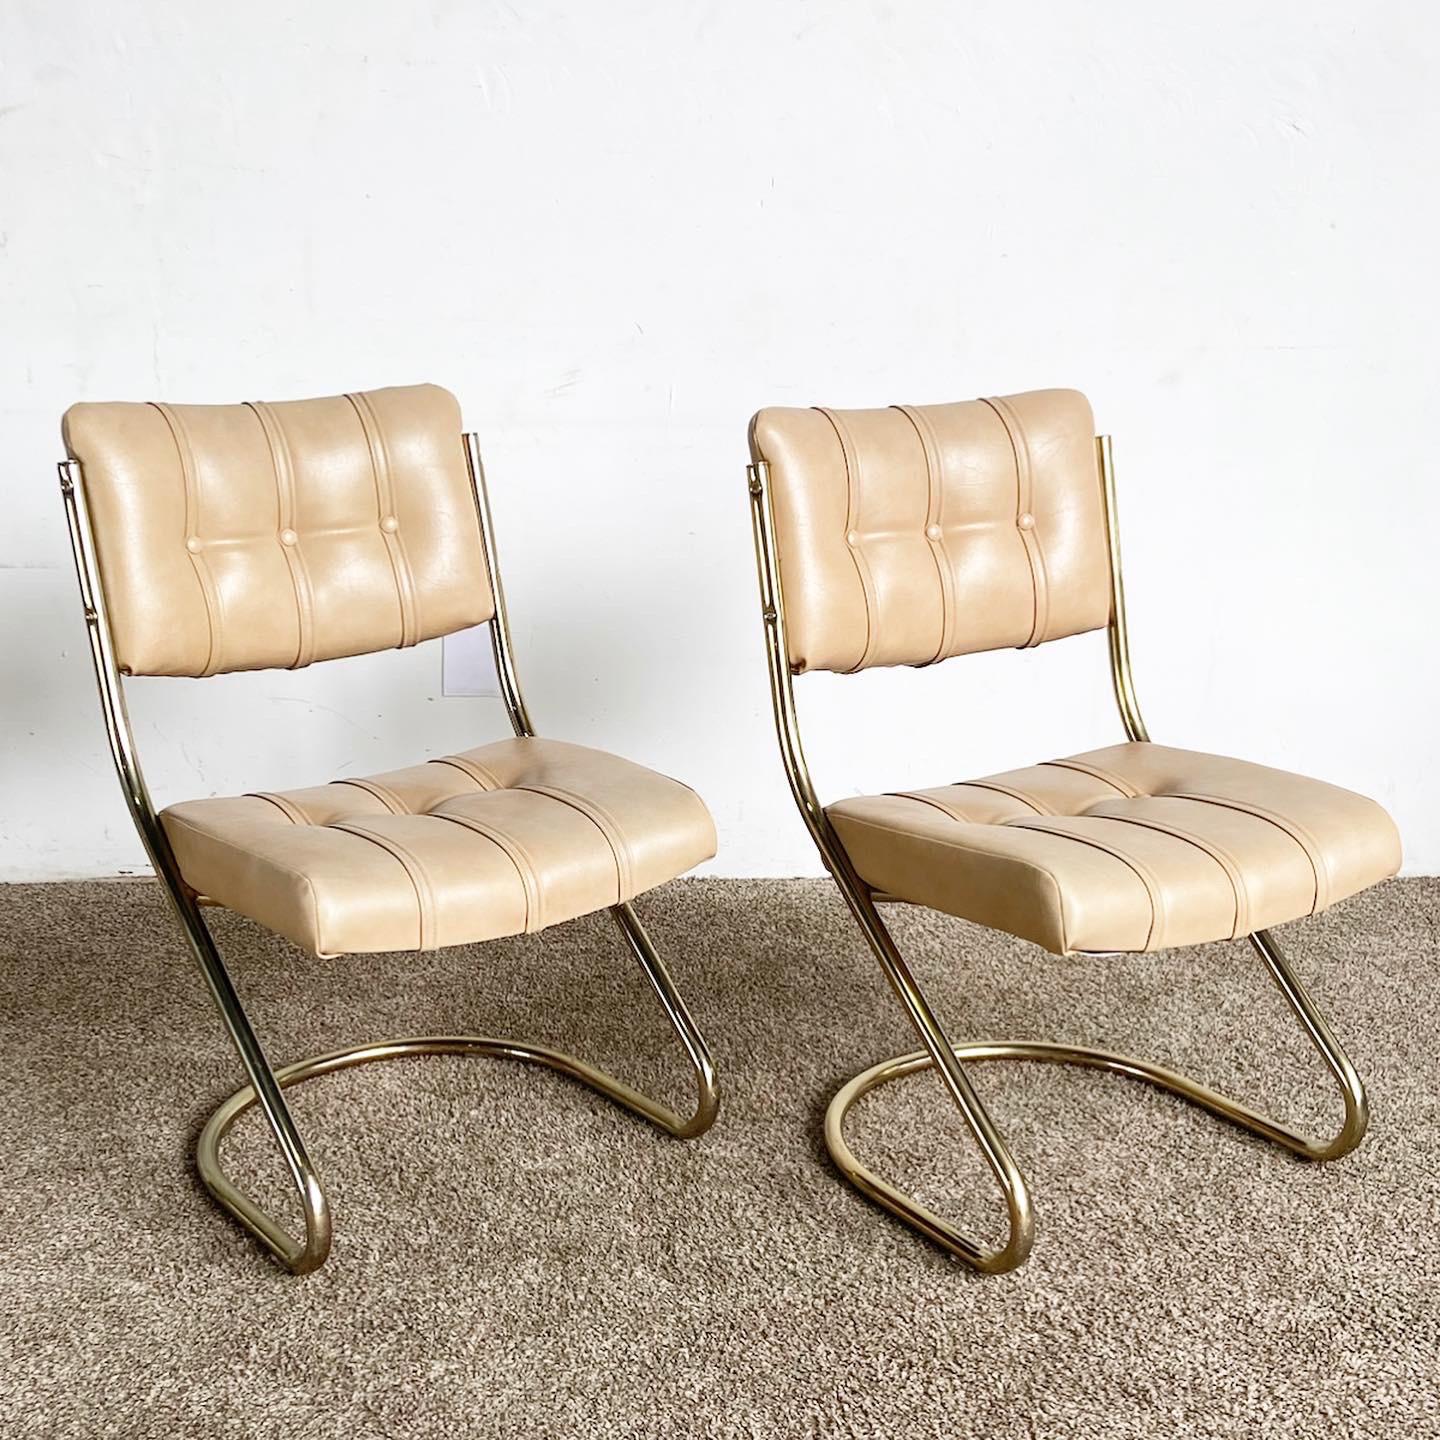 Mid-Century Modern Mid Century Modern Gold and Tan Tufted Cantilever Chairs by Chromcraft - a Pair For Sale